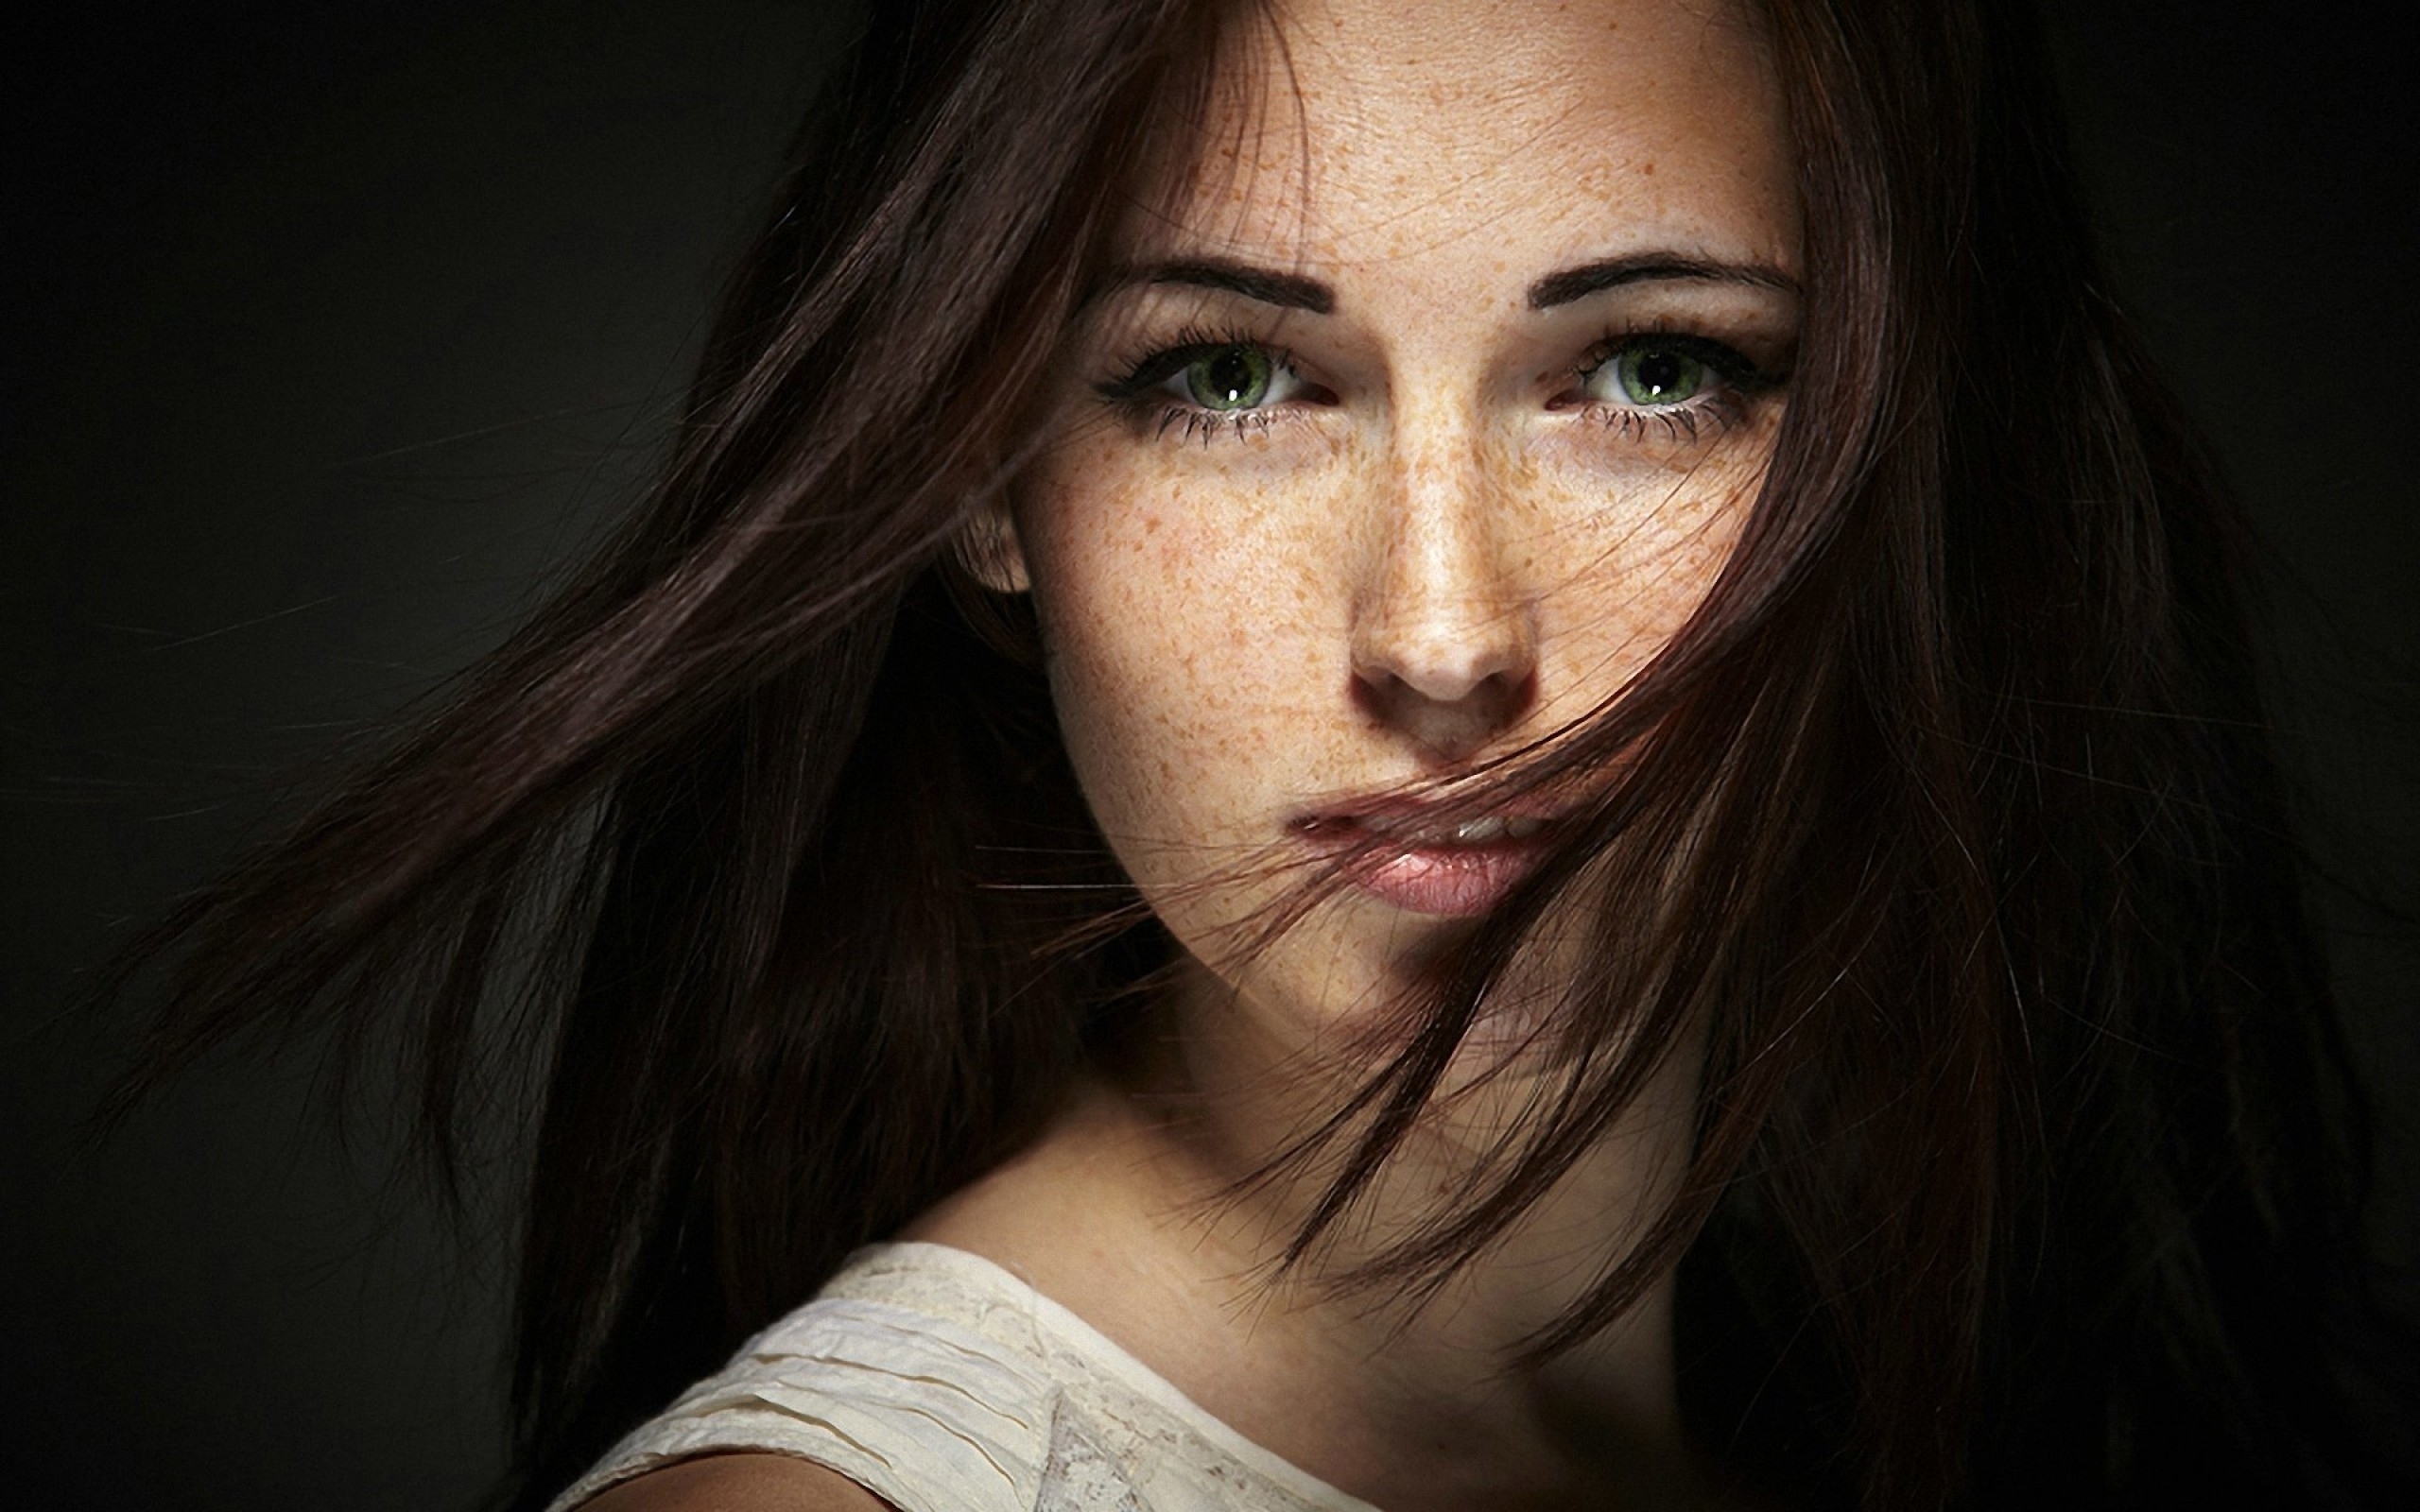 Pictures Of Freckled Girls